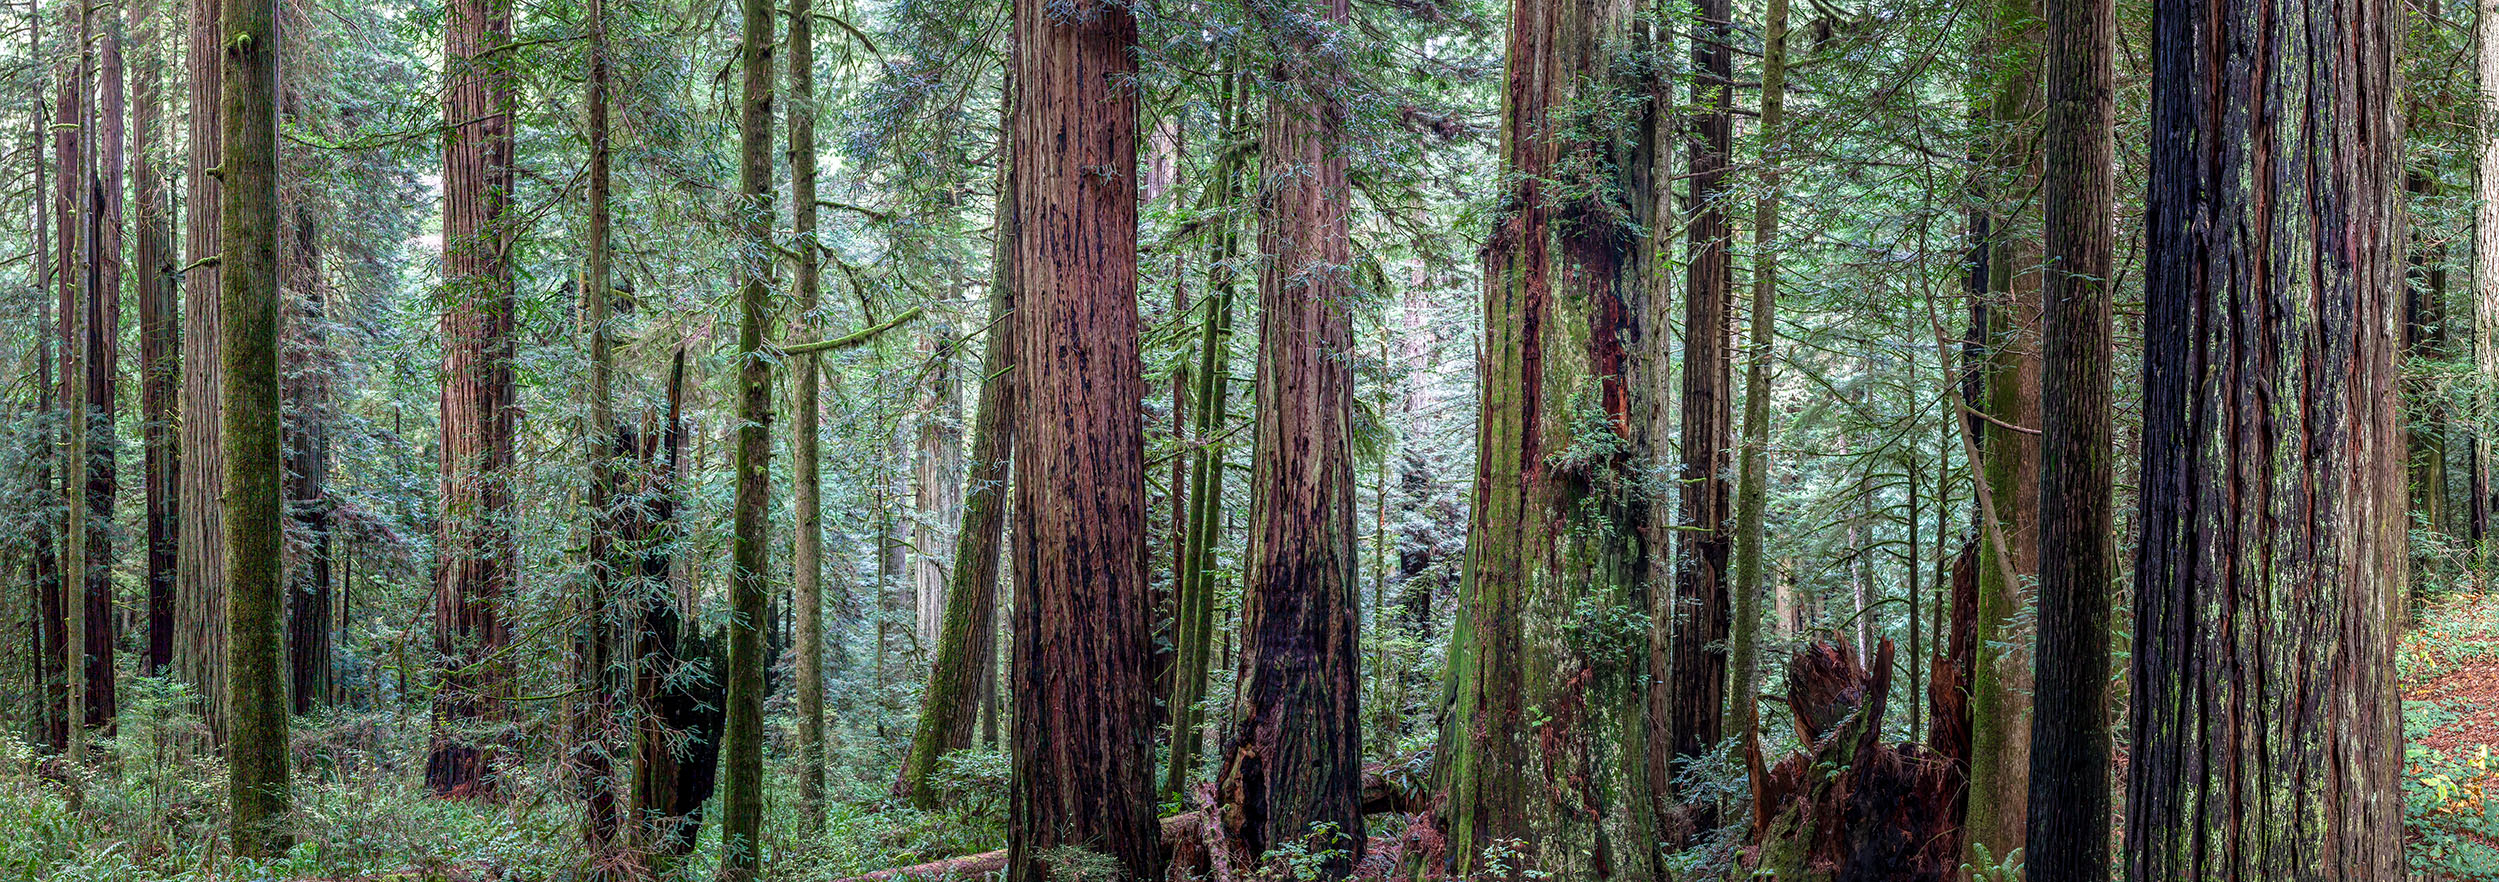 This panoramic image, captured in California's Redwoods National Park, offers a sweeping view of the forest's heart. The towering...